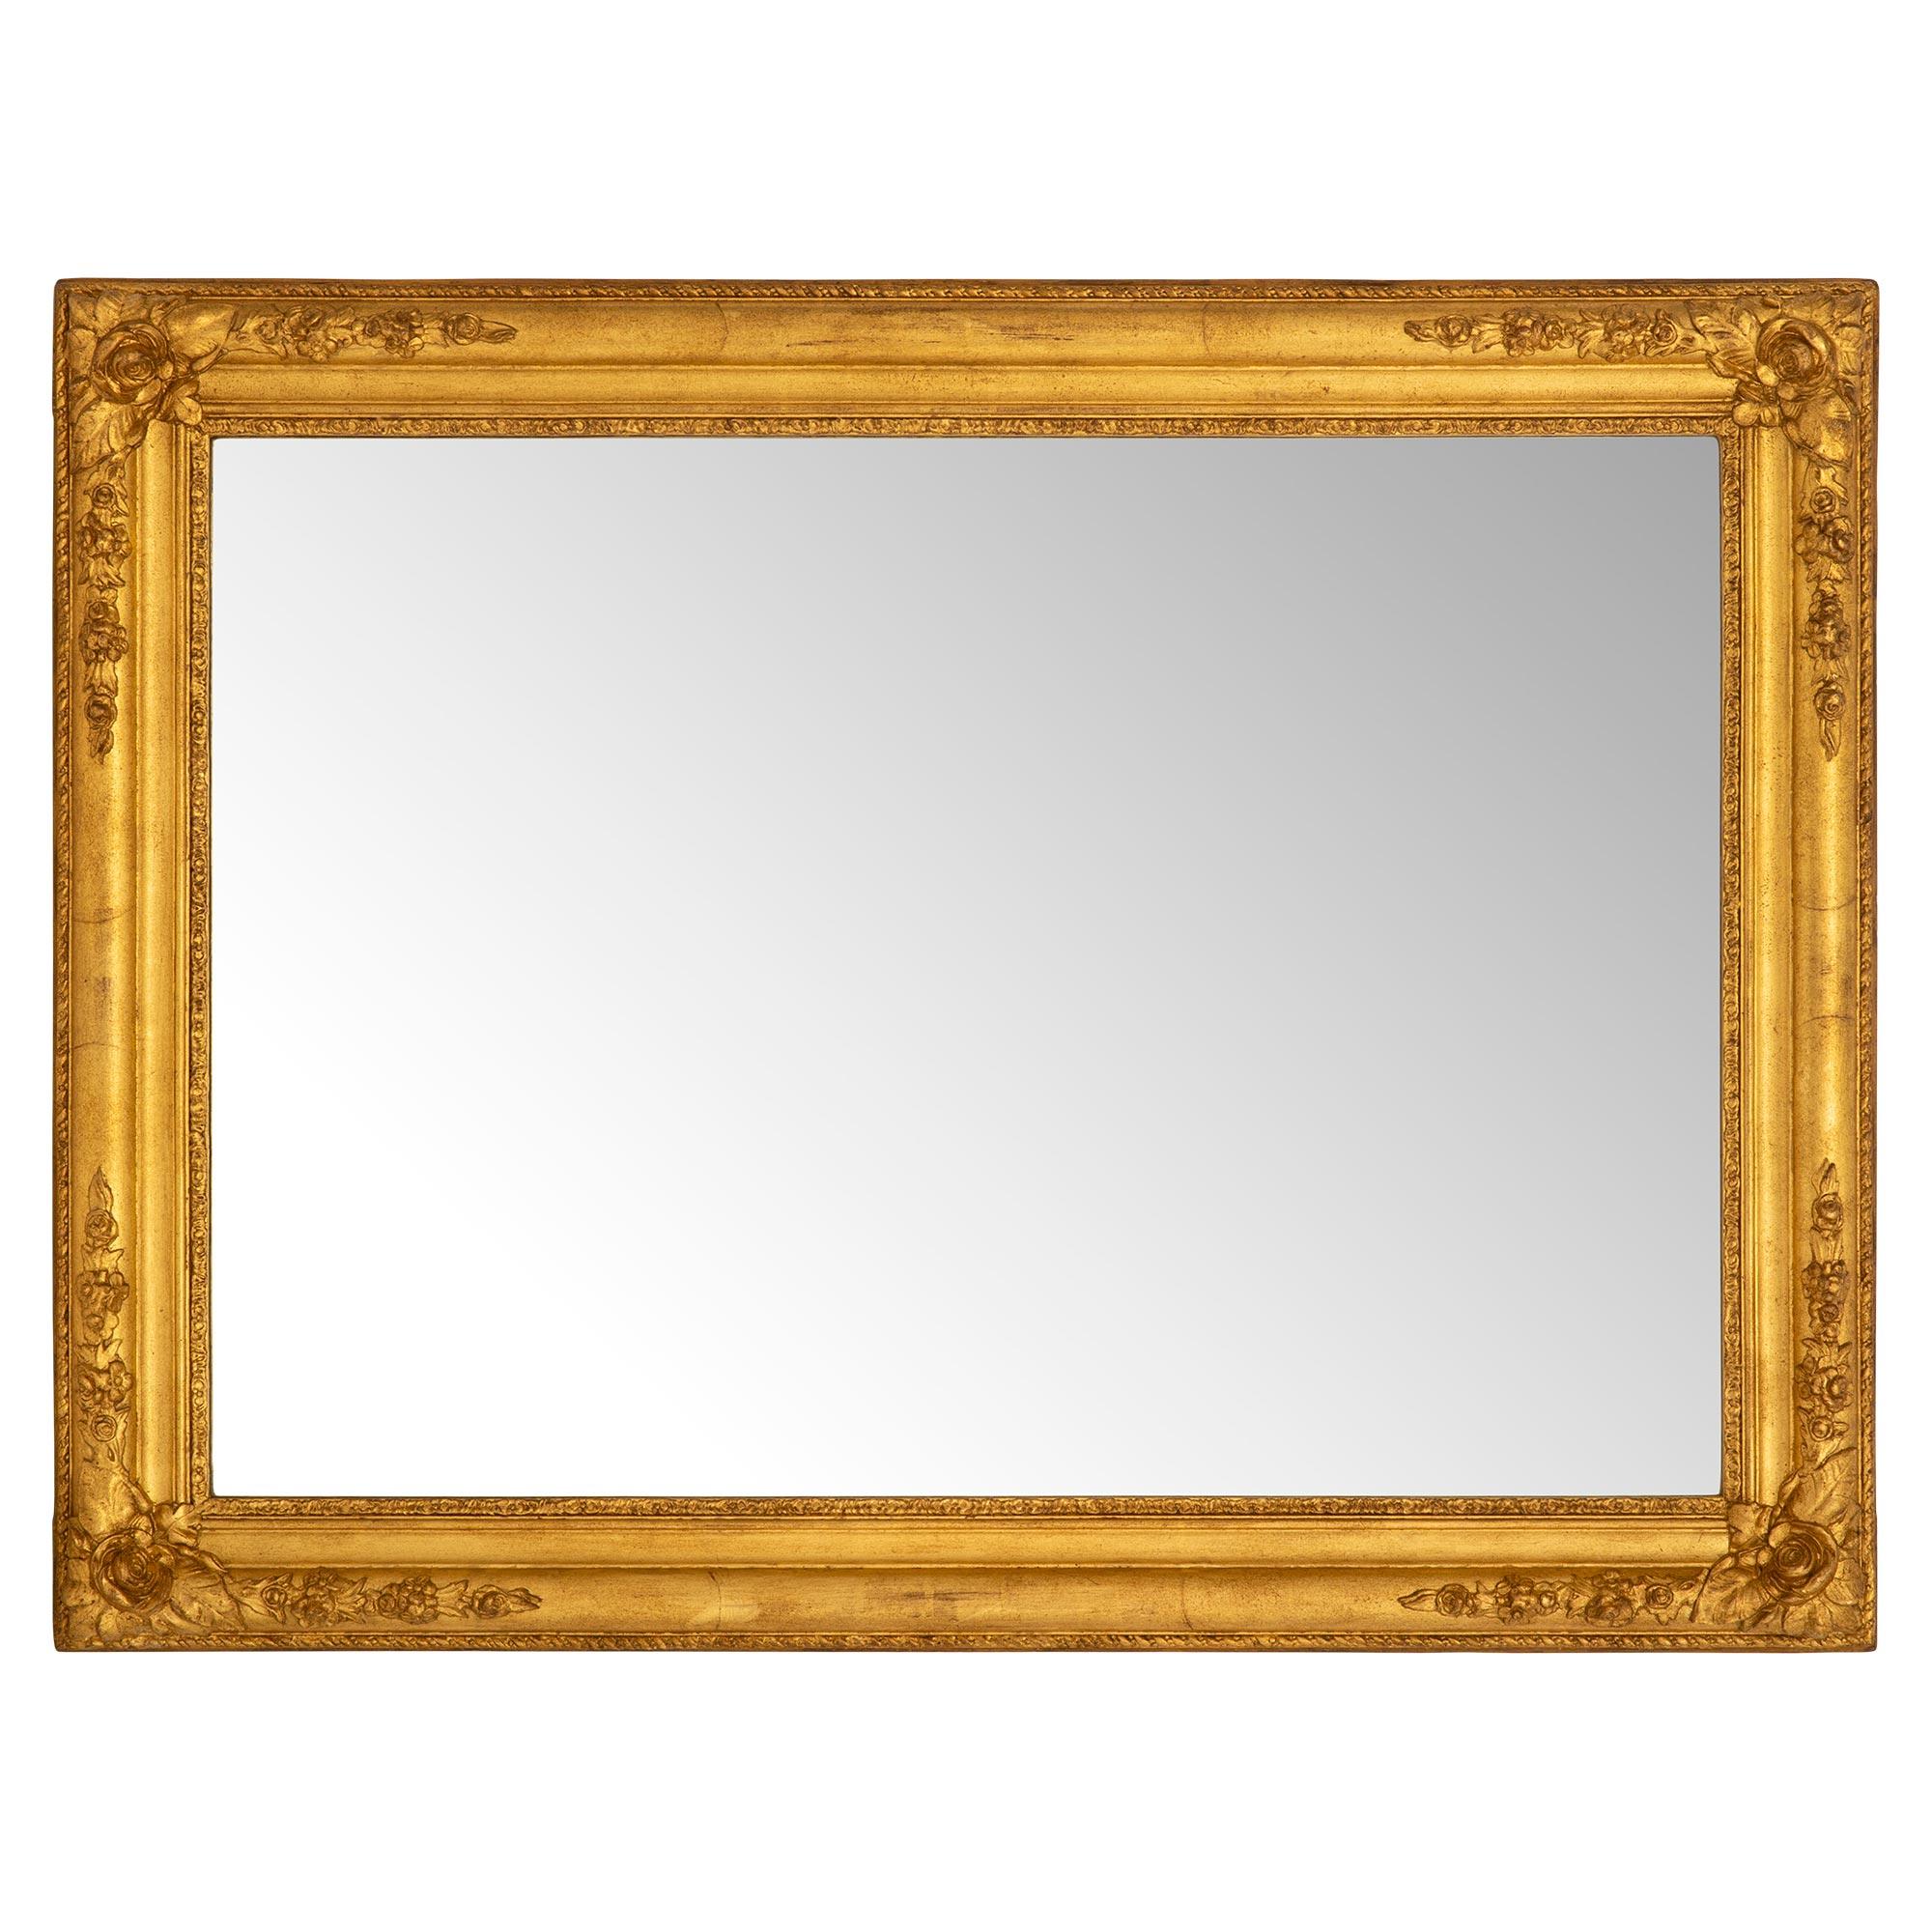 A most charming rectangular French 19th century Louis XVI st. giltwood mirror. The original mirror plate is set within a fine wraparound foliate and mottled frame. At each corner are beautiful extremely decorative floral and foliate reserves with